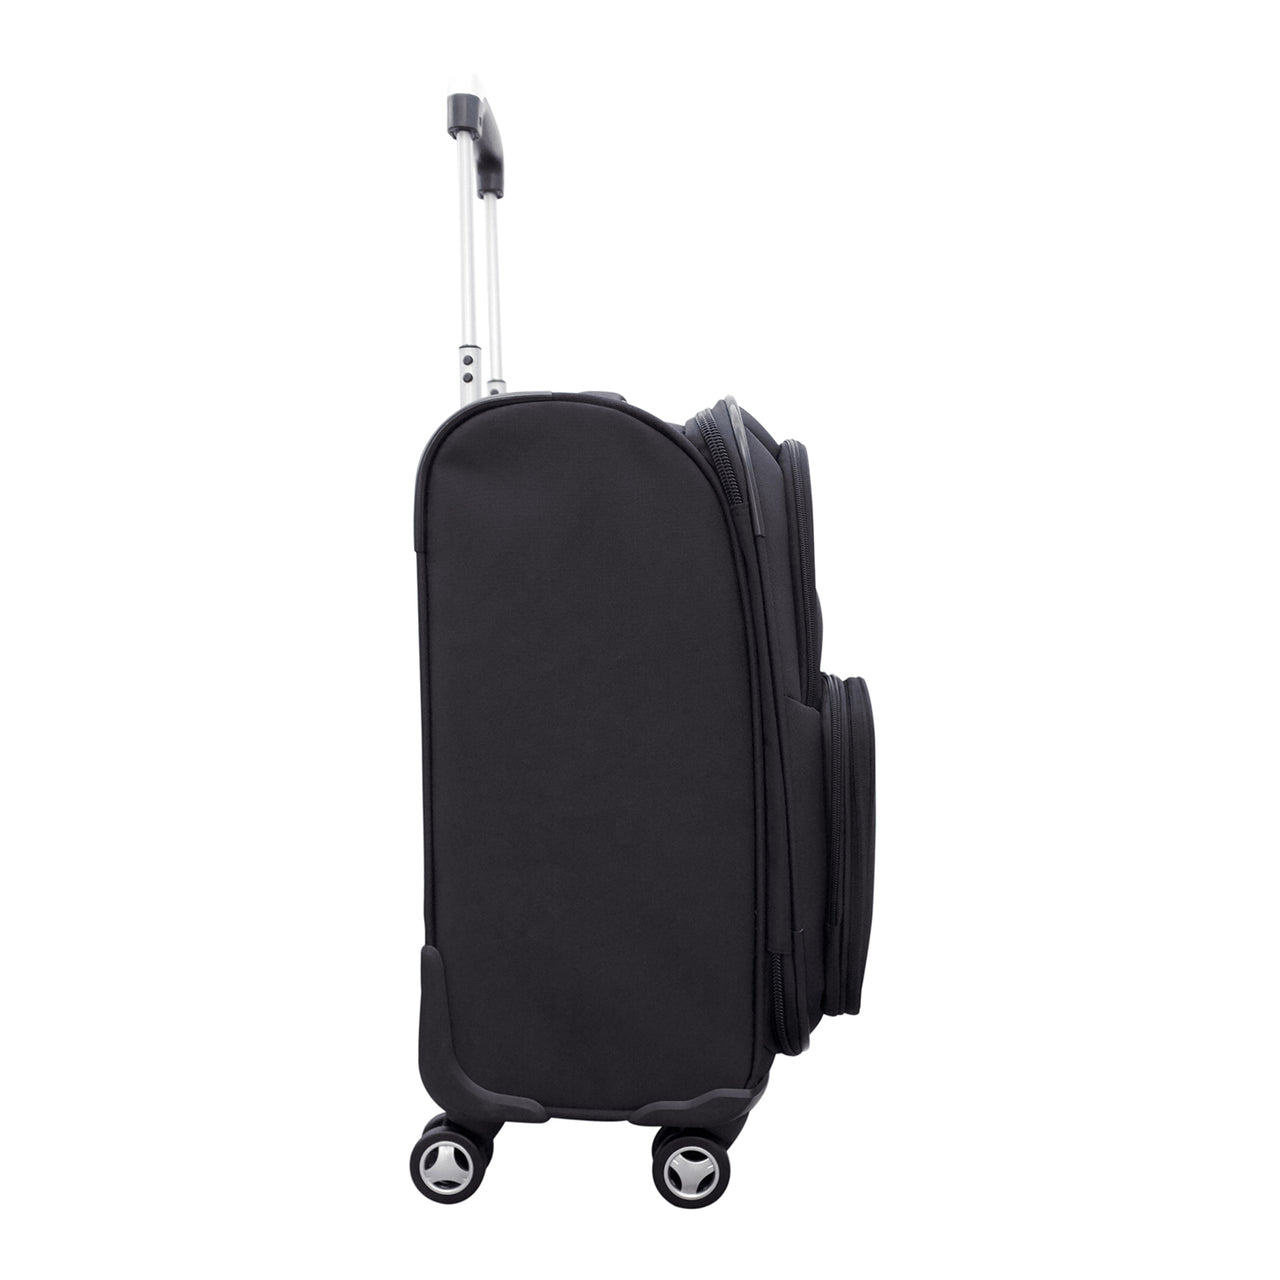 Team USA 20" Carry-on Spinner Luggage